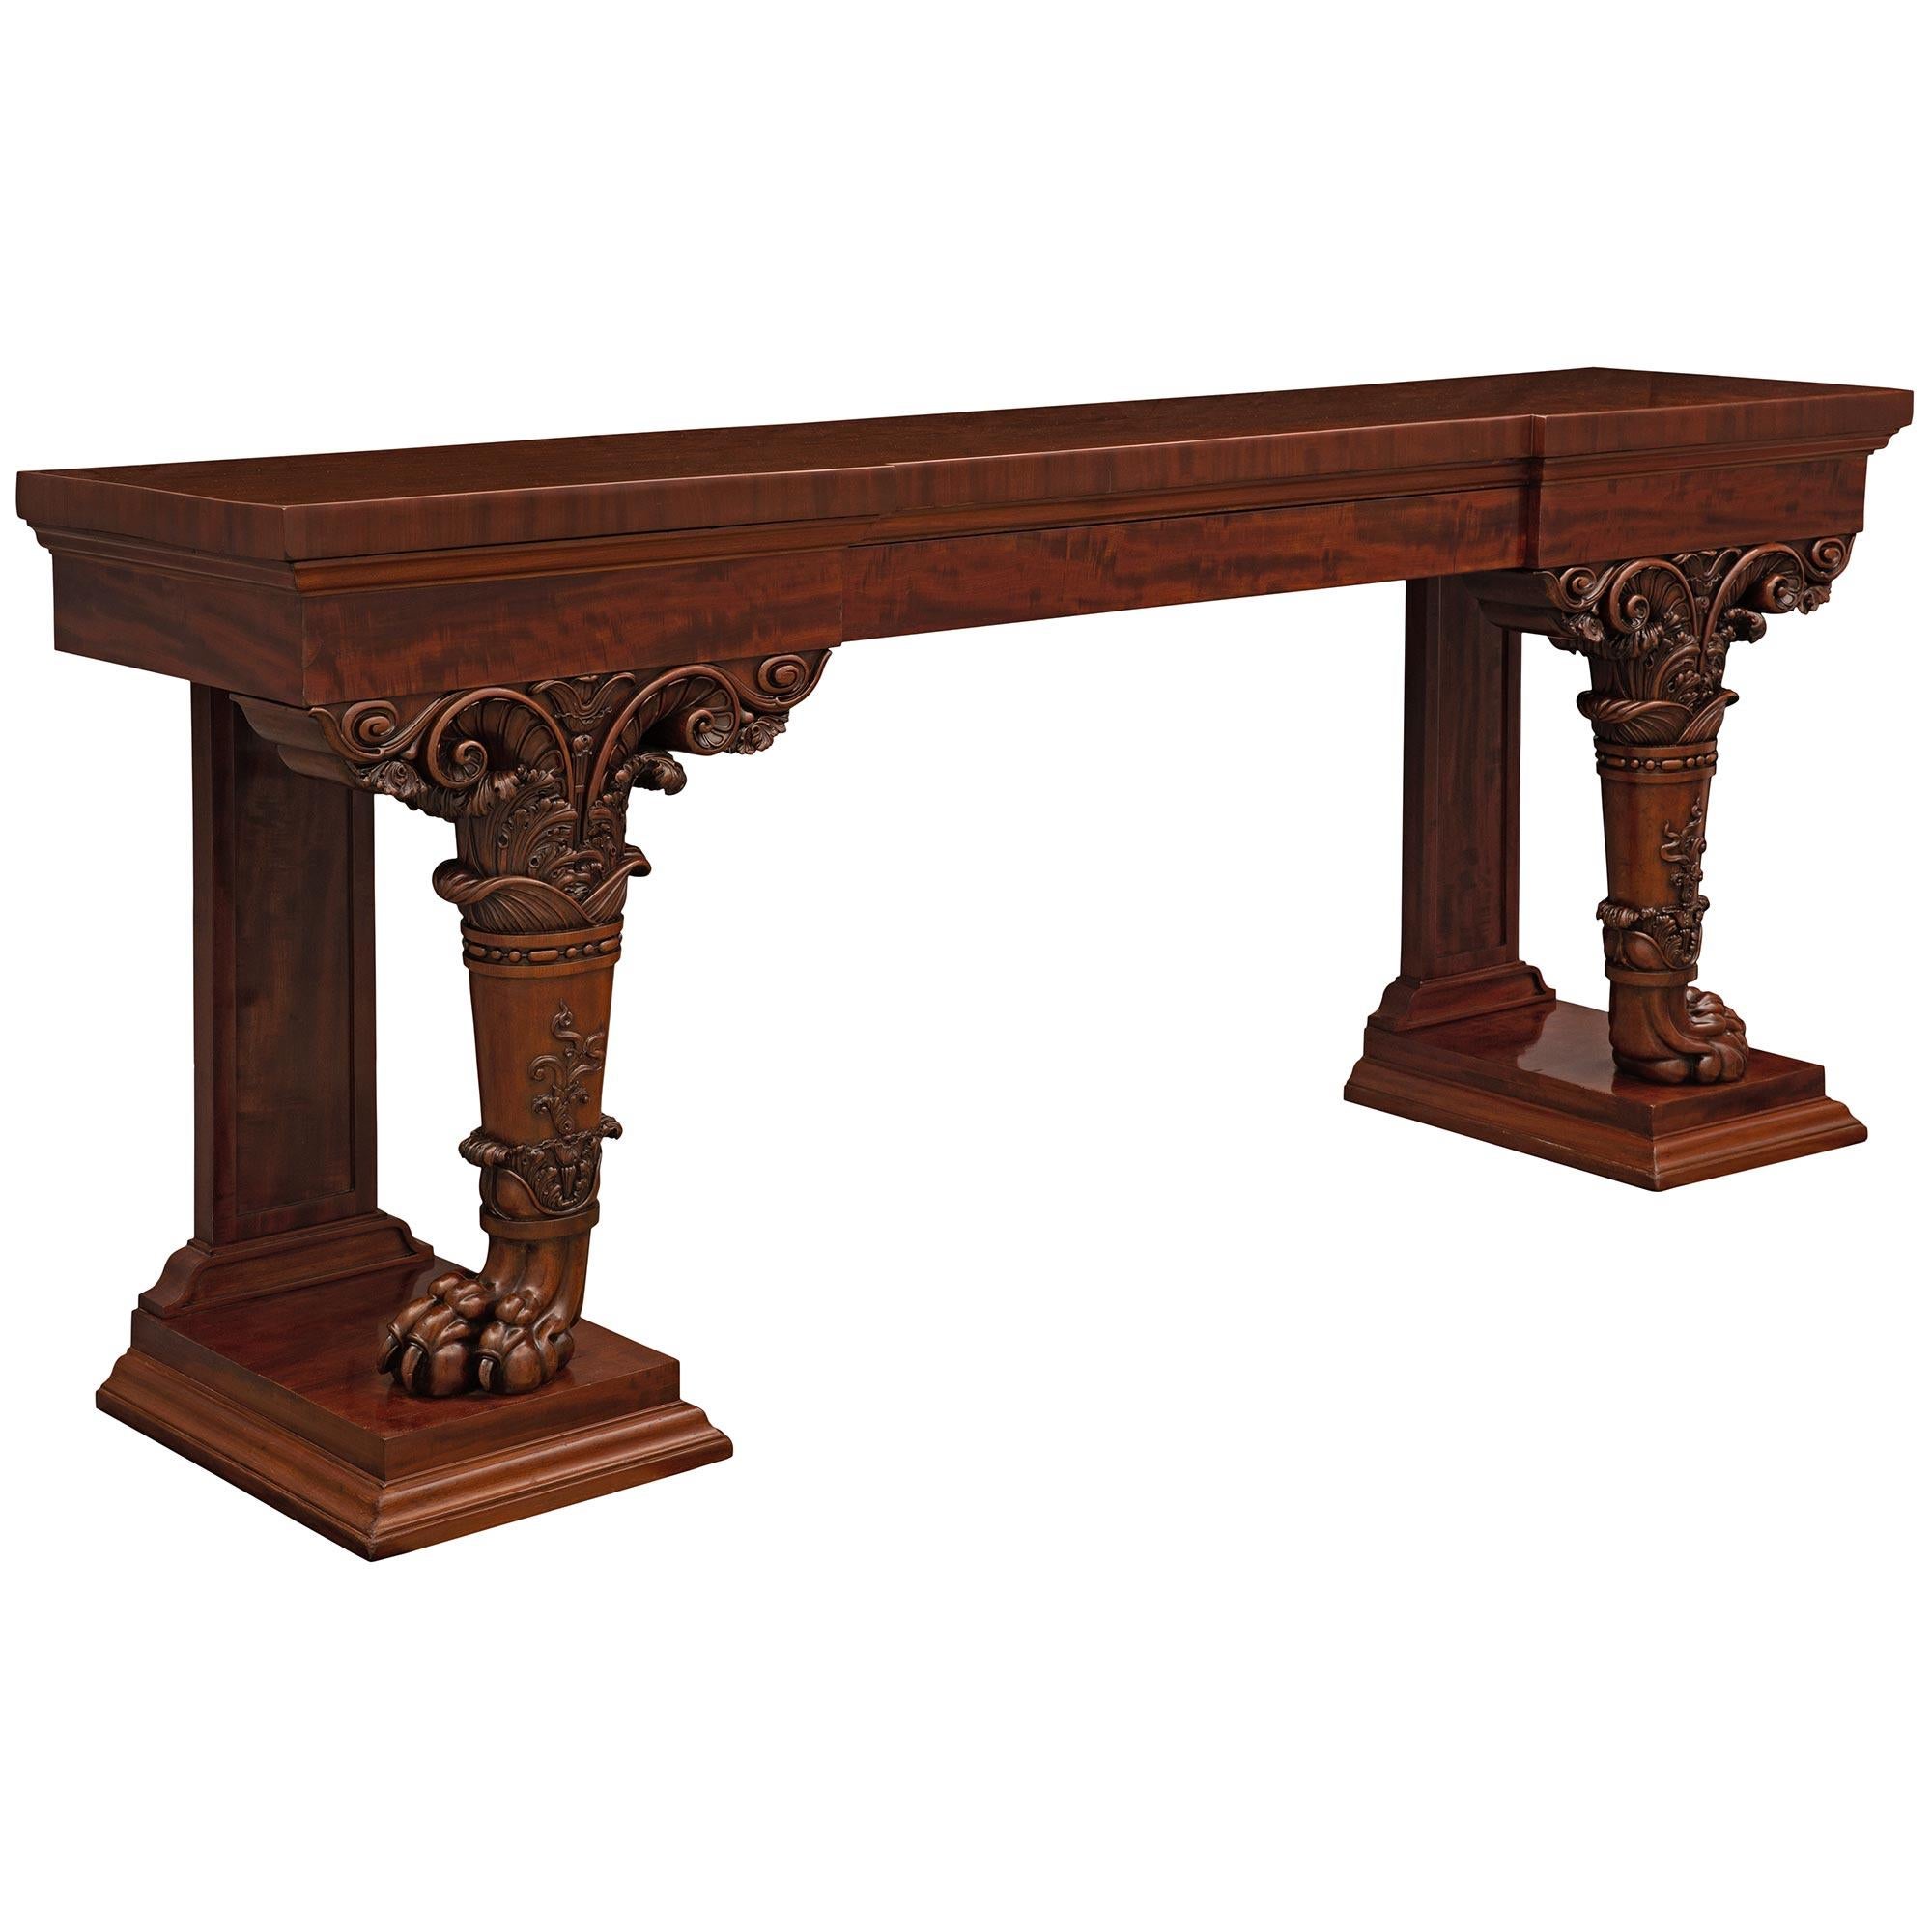 Italian Mid-19th Century Mahogany Regency St. Console In Good Condition For Sale In West Palm Beach, FL